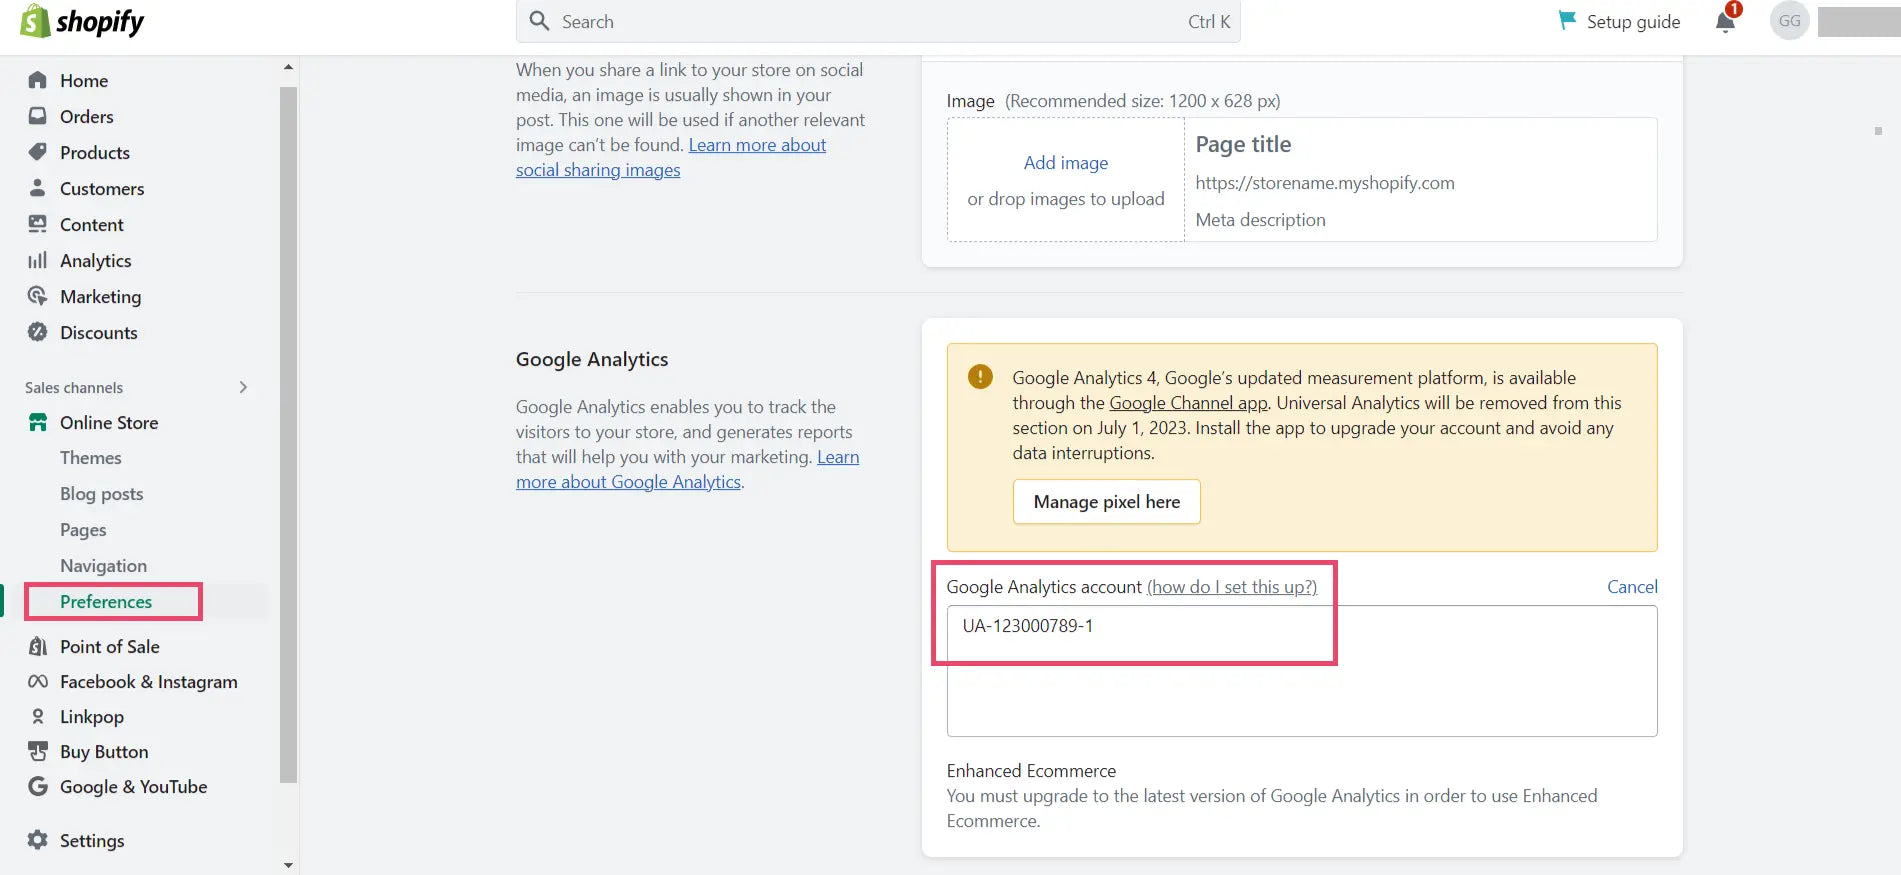 Google Analytics section in Shopify admin